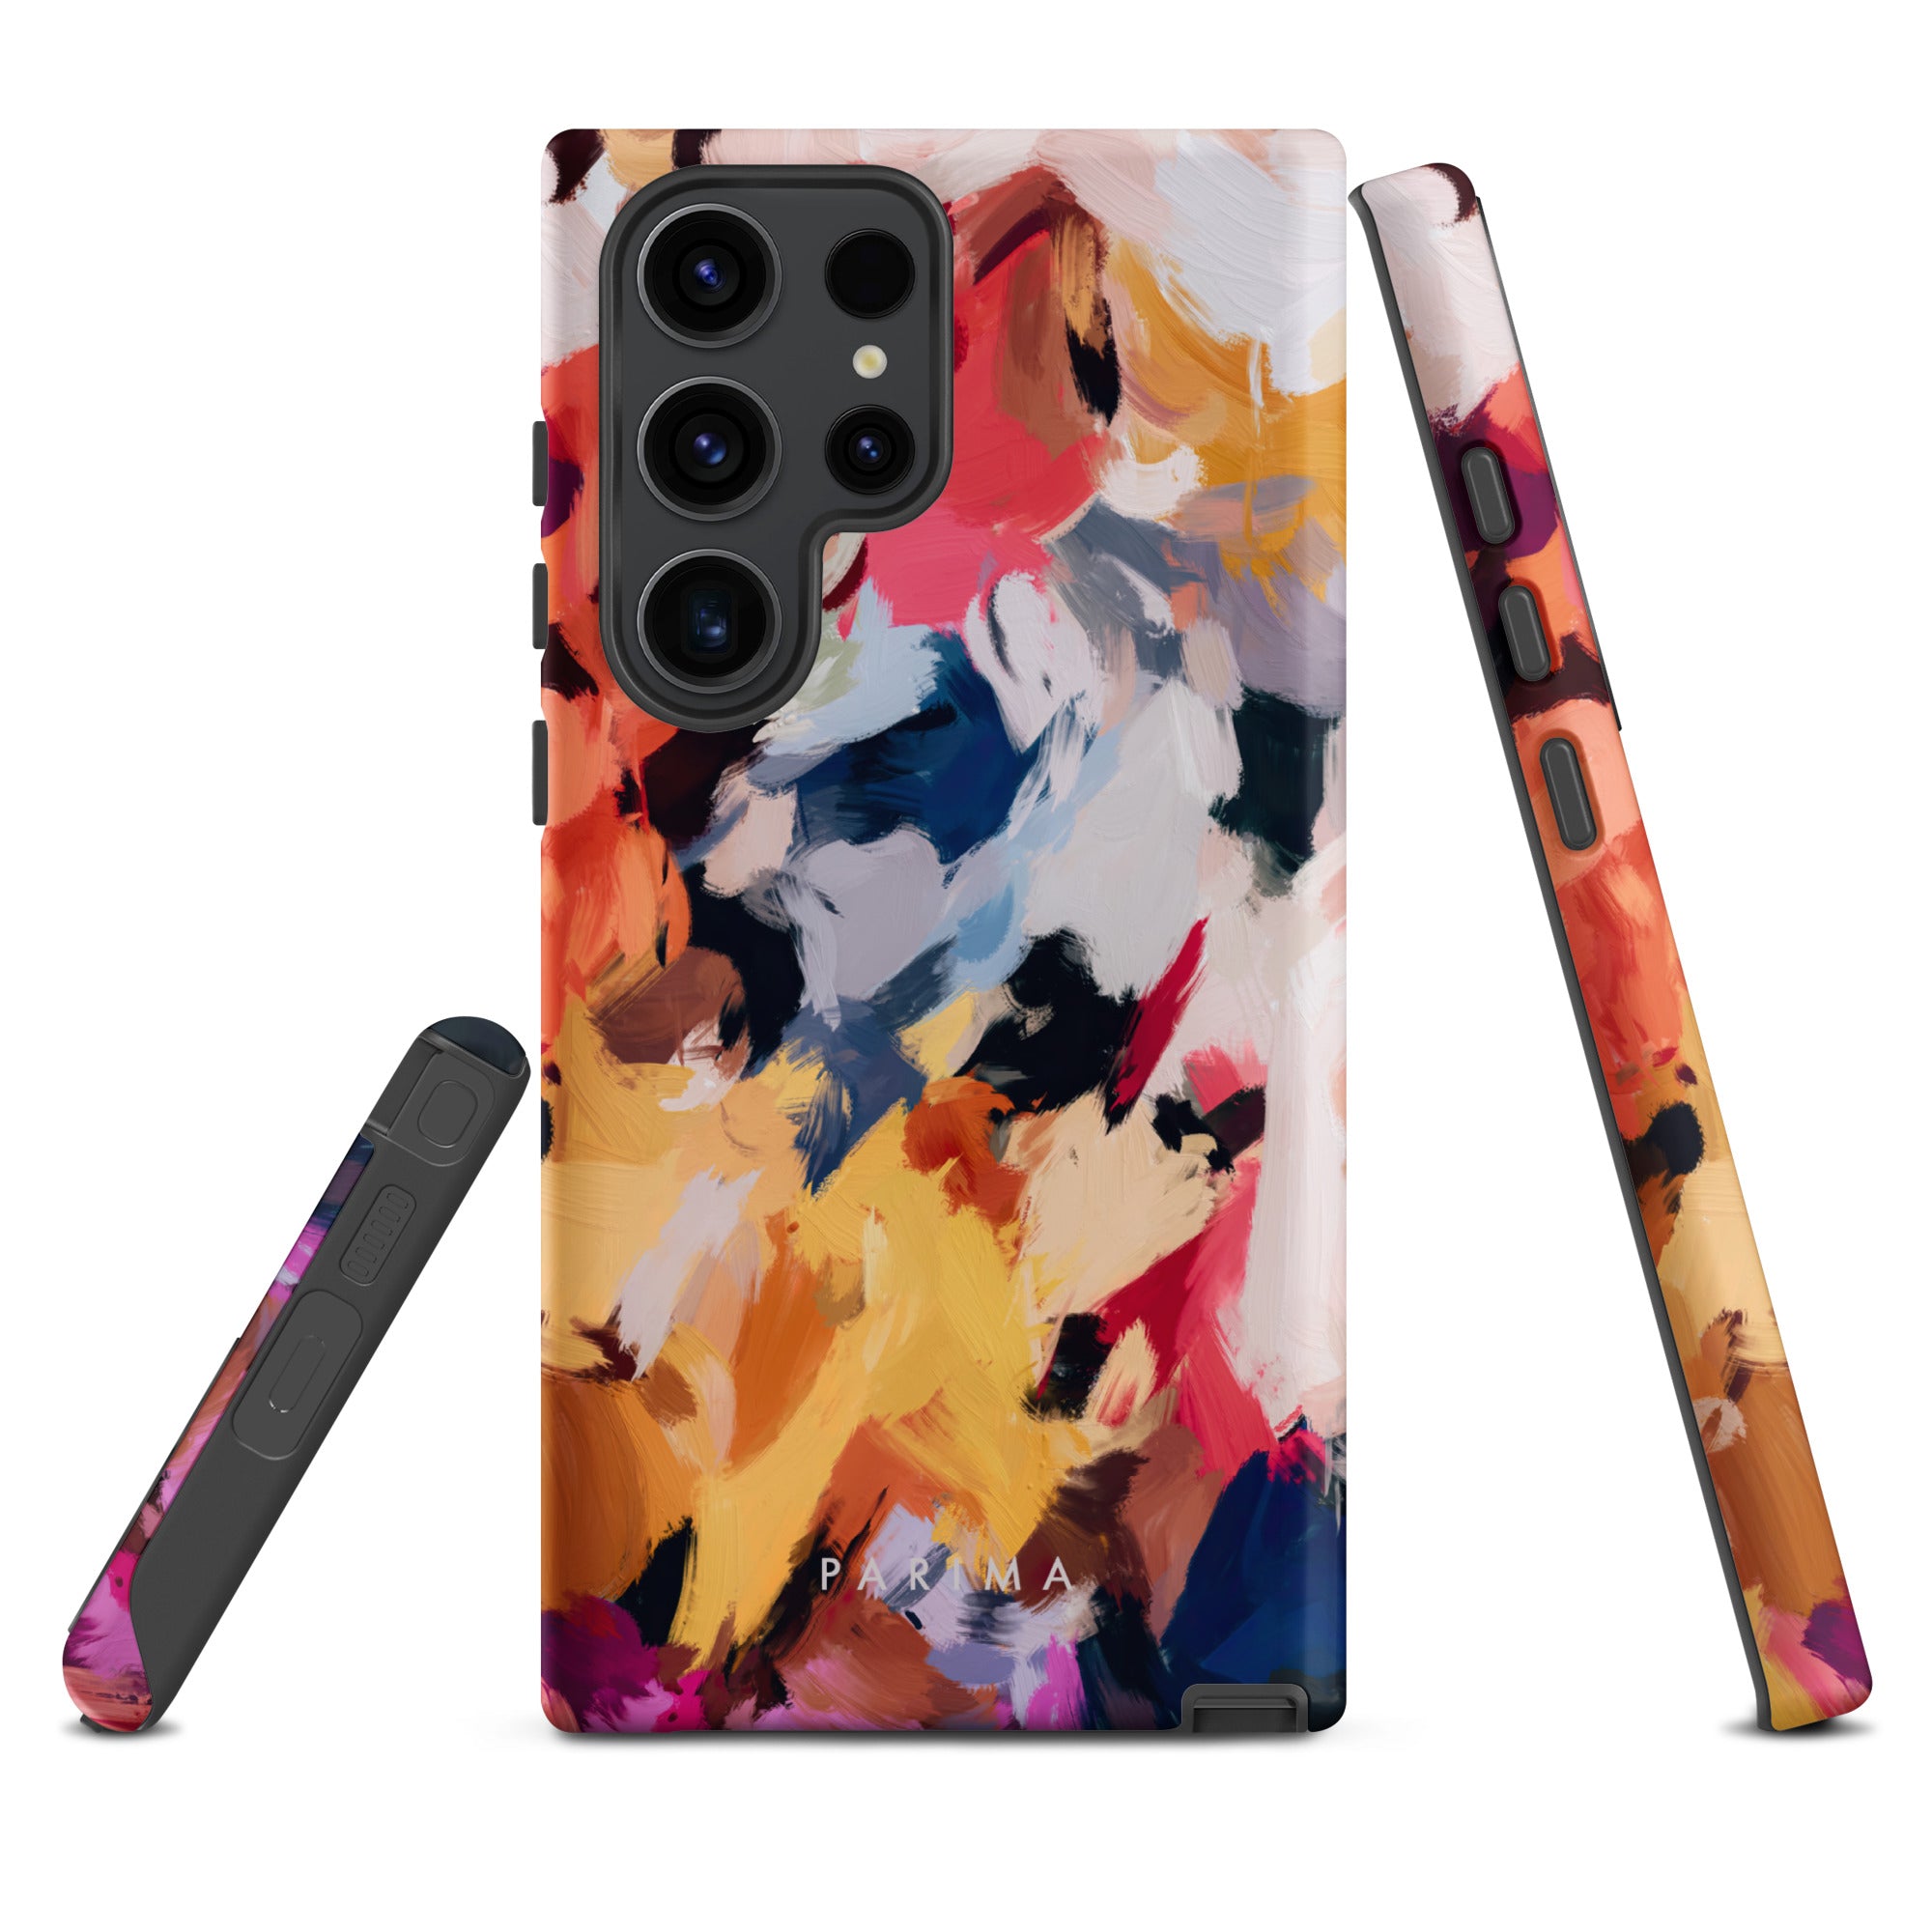 Wilde, blue and yellow multicolor abstract art on Samsung Galaxy S23 Ultra tough case by Parima Studio